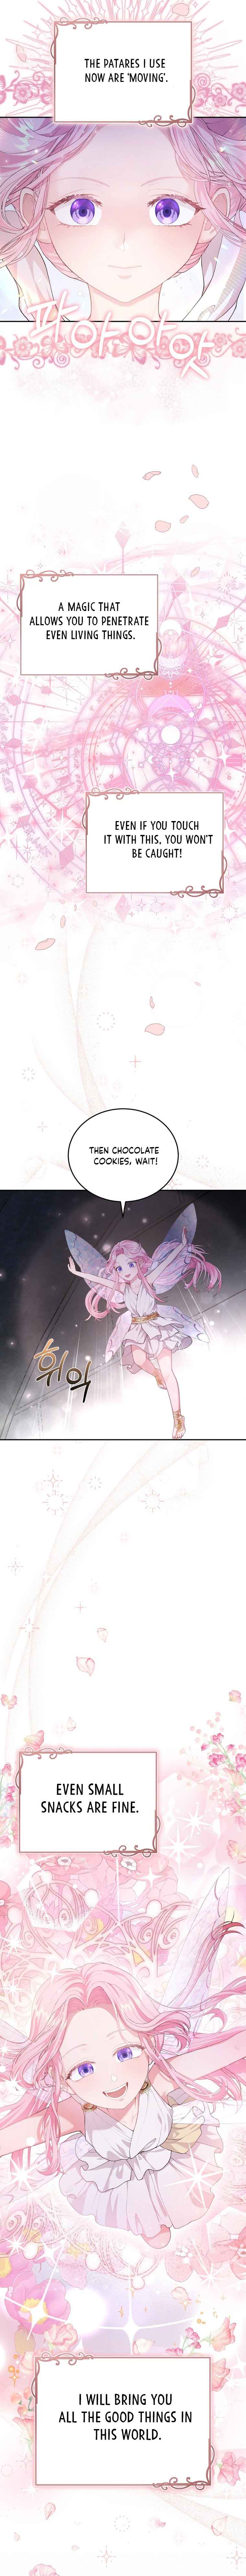 Dear Fairy, Please Contract With Me chapter 3